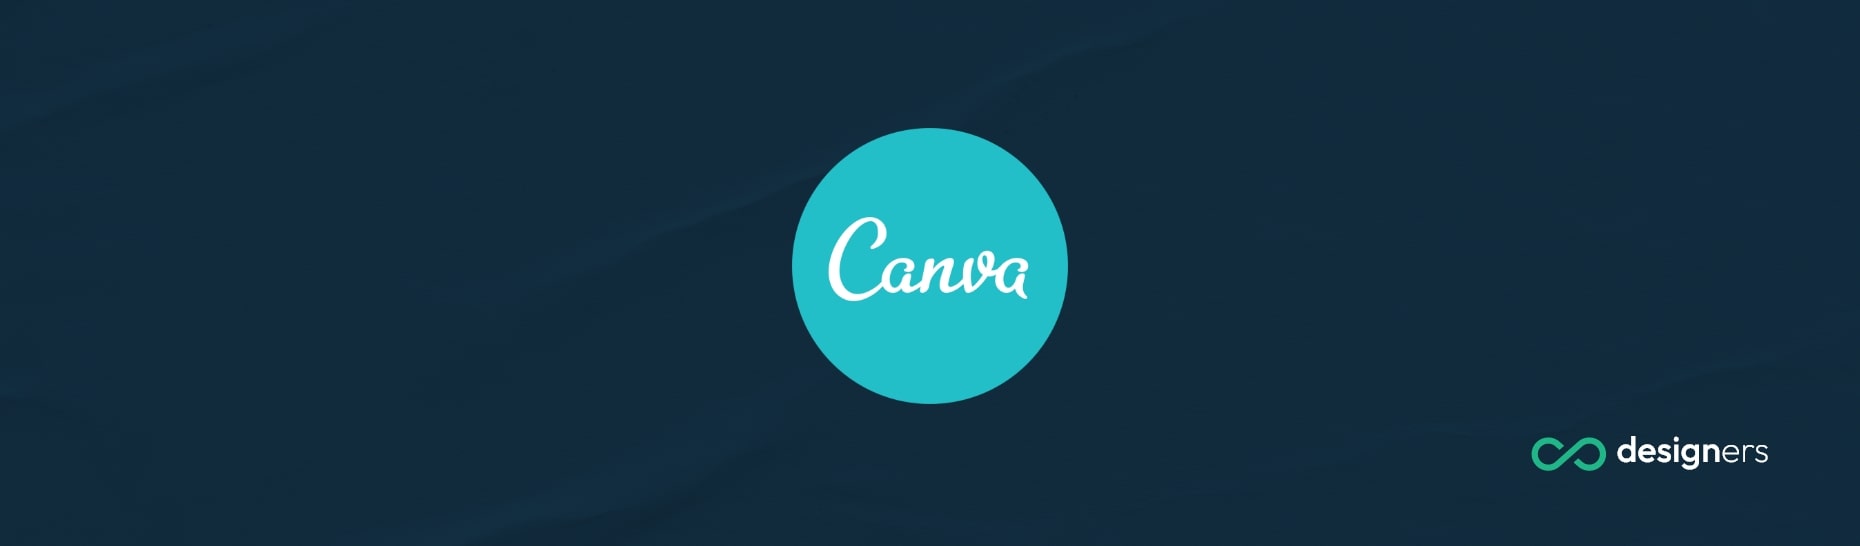 How Do I Print Double Sided Business Cards in Canva?